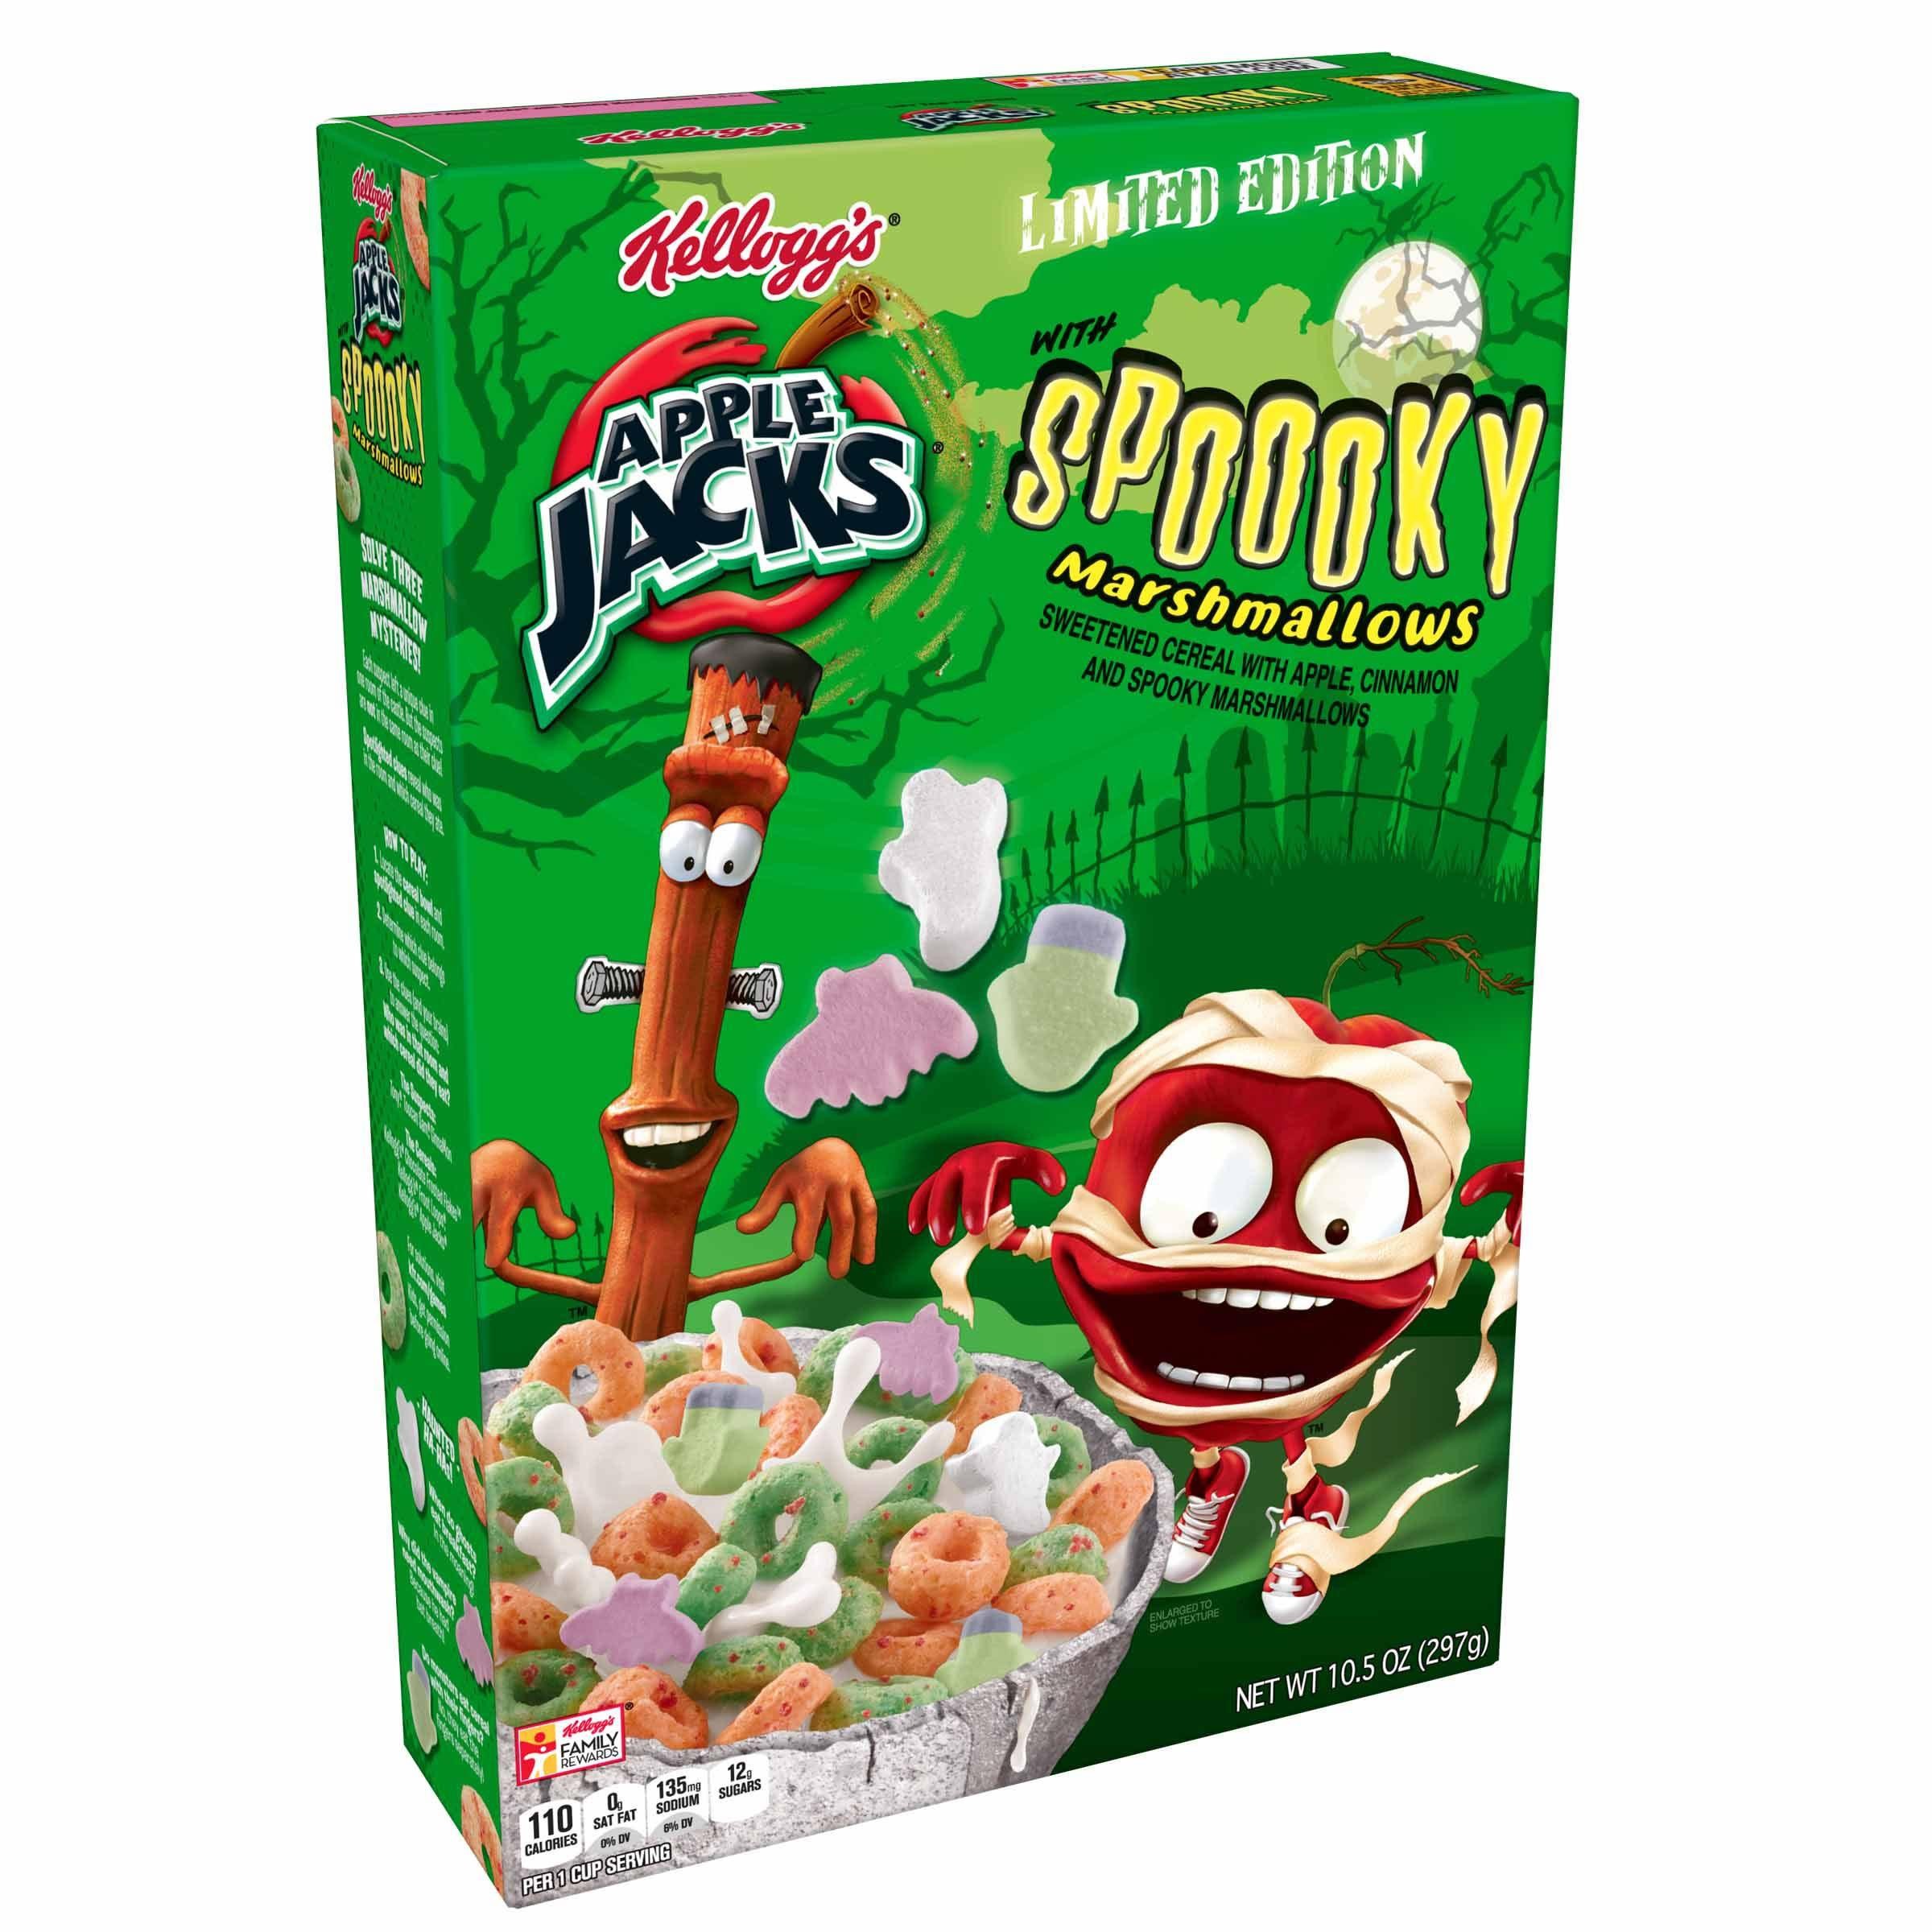 Kellogg's Apple Jacks Breakfast Cereal, Original with Spooky Marshmallows, Excellent Source of 8 Vitamins and Minerals Limited Edition, 10.5oz